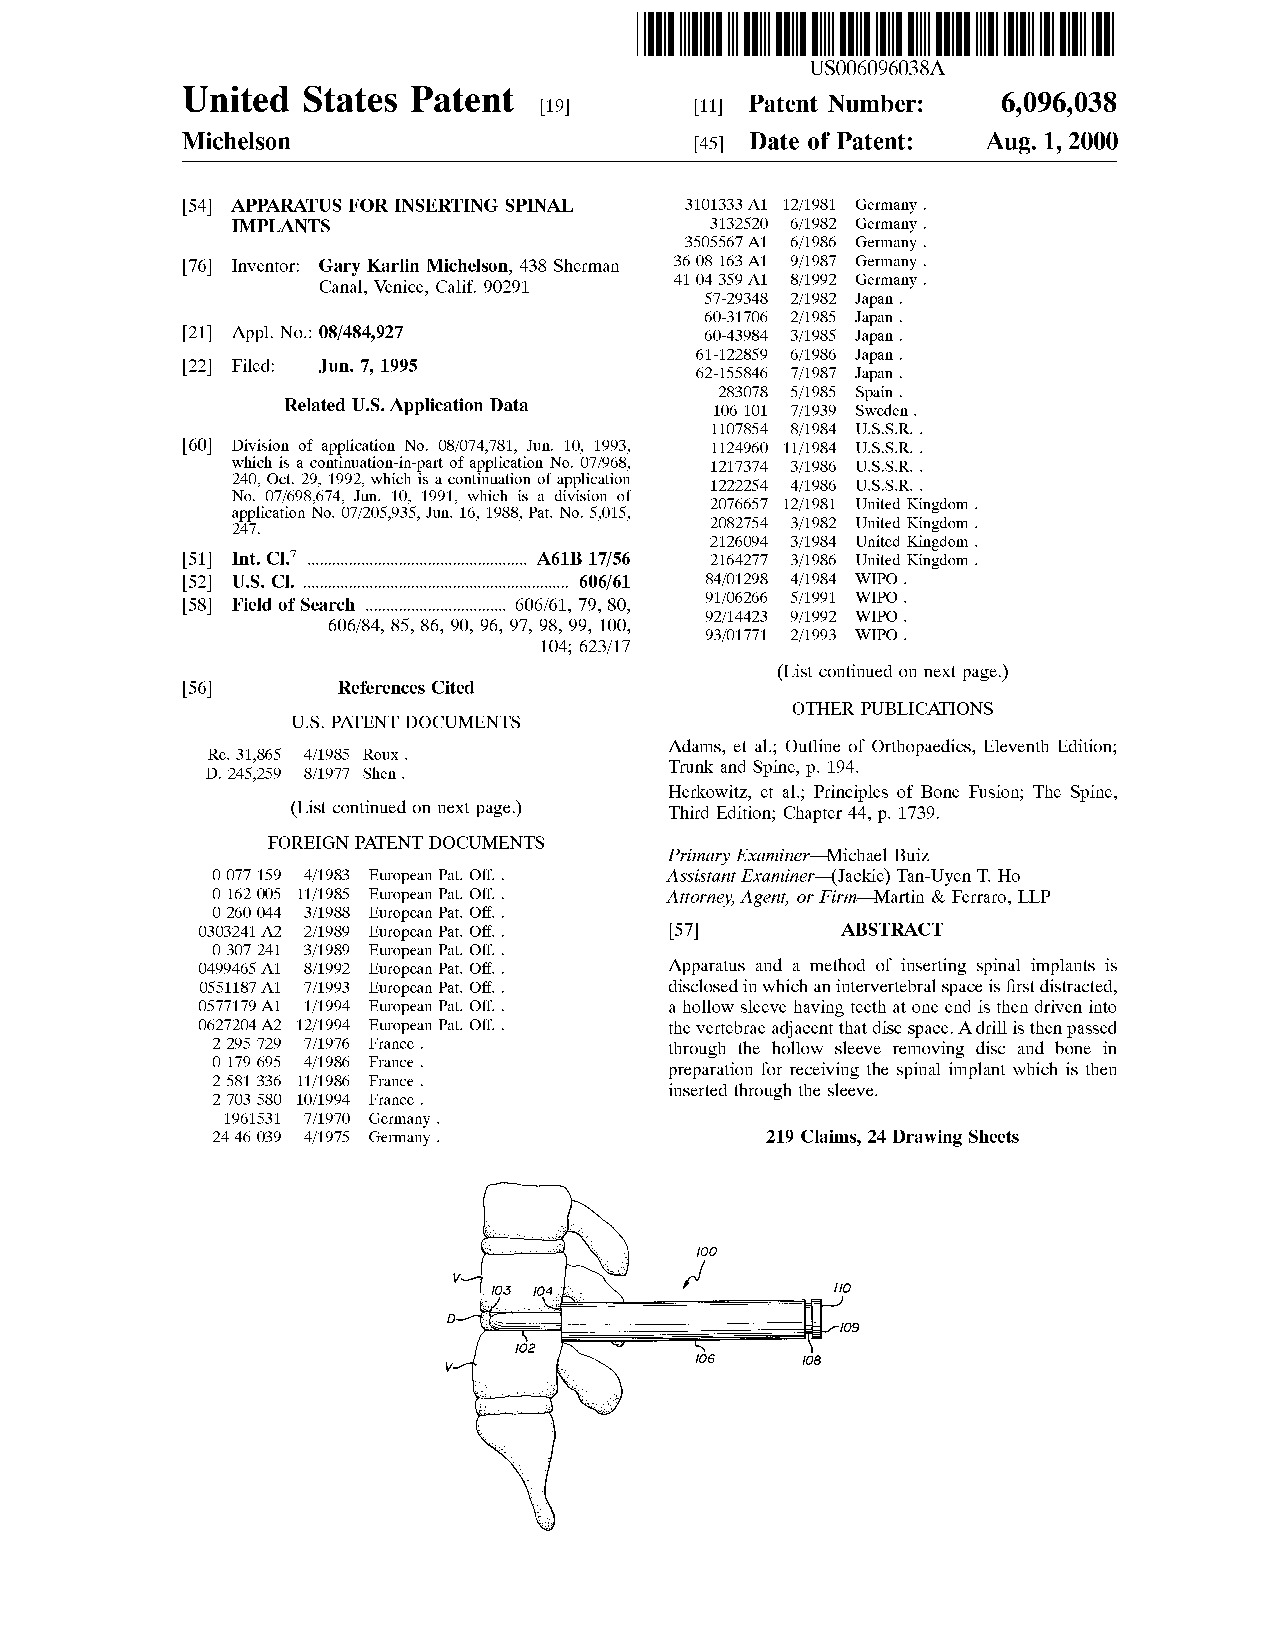 Apparatus for inserting spinal implants - Patent 6,096,038